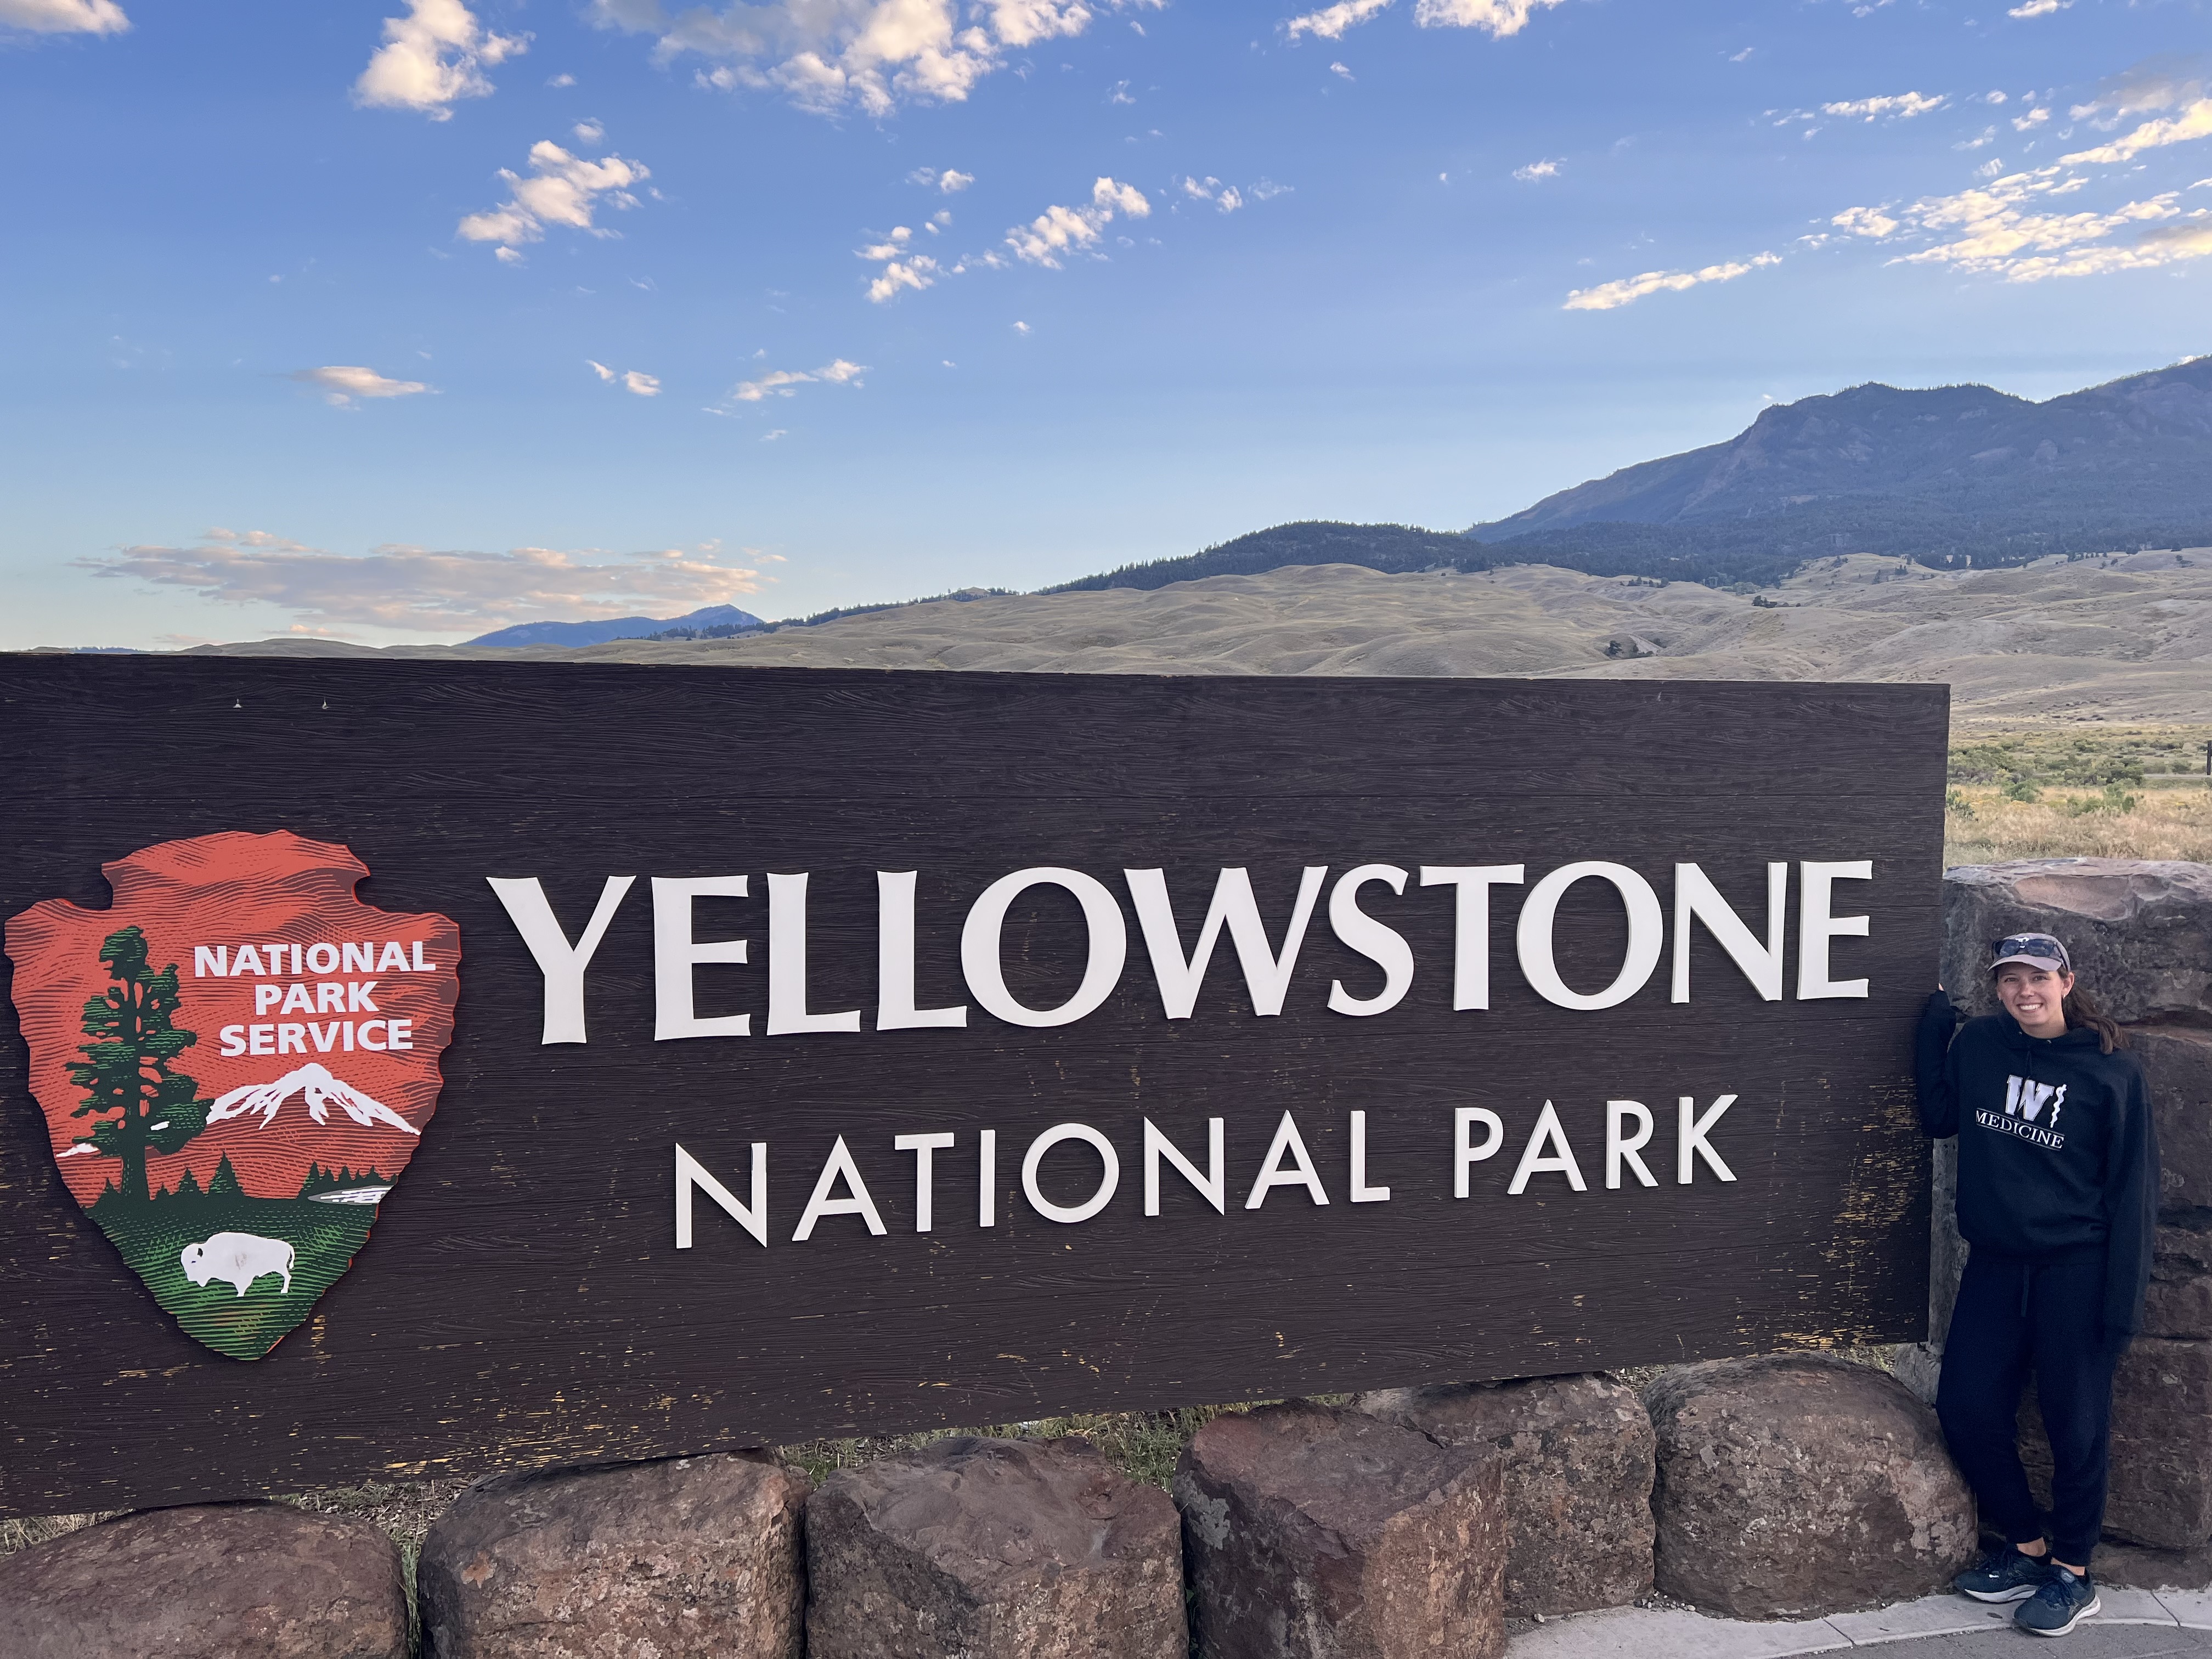 WMed learners gaining invaluable experience as partnership between Yellowstone National Park and medical school flourishes